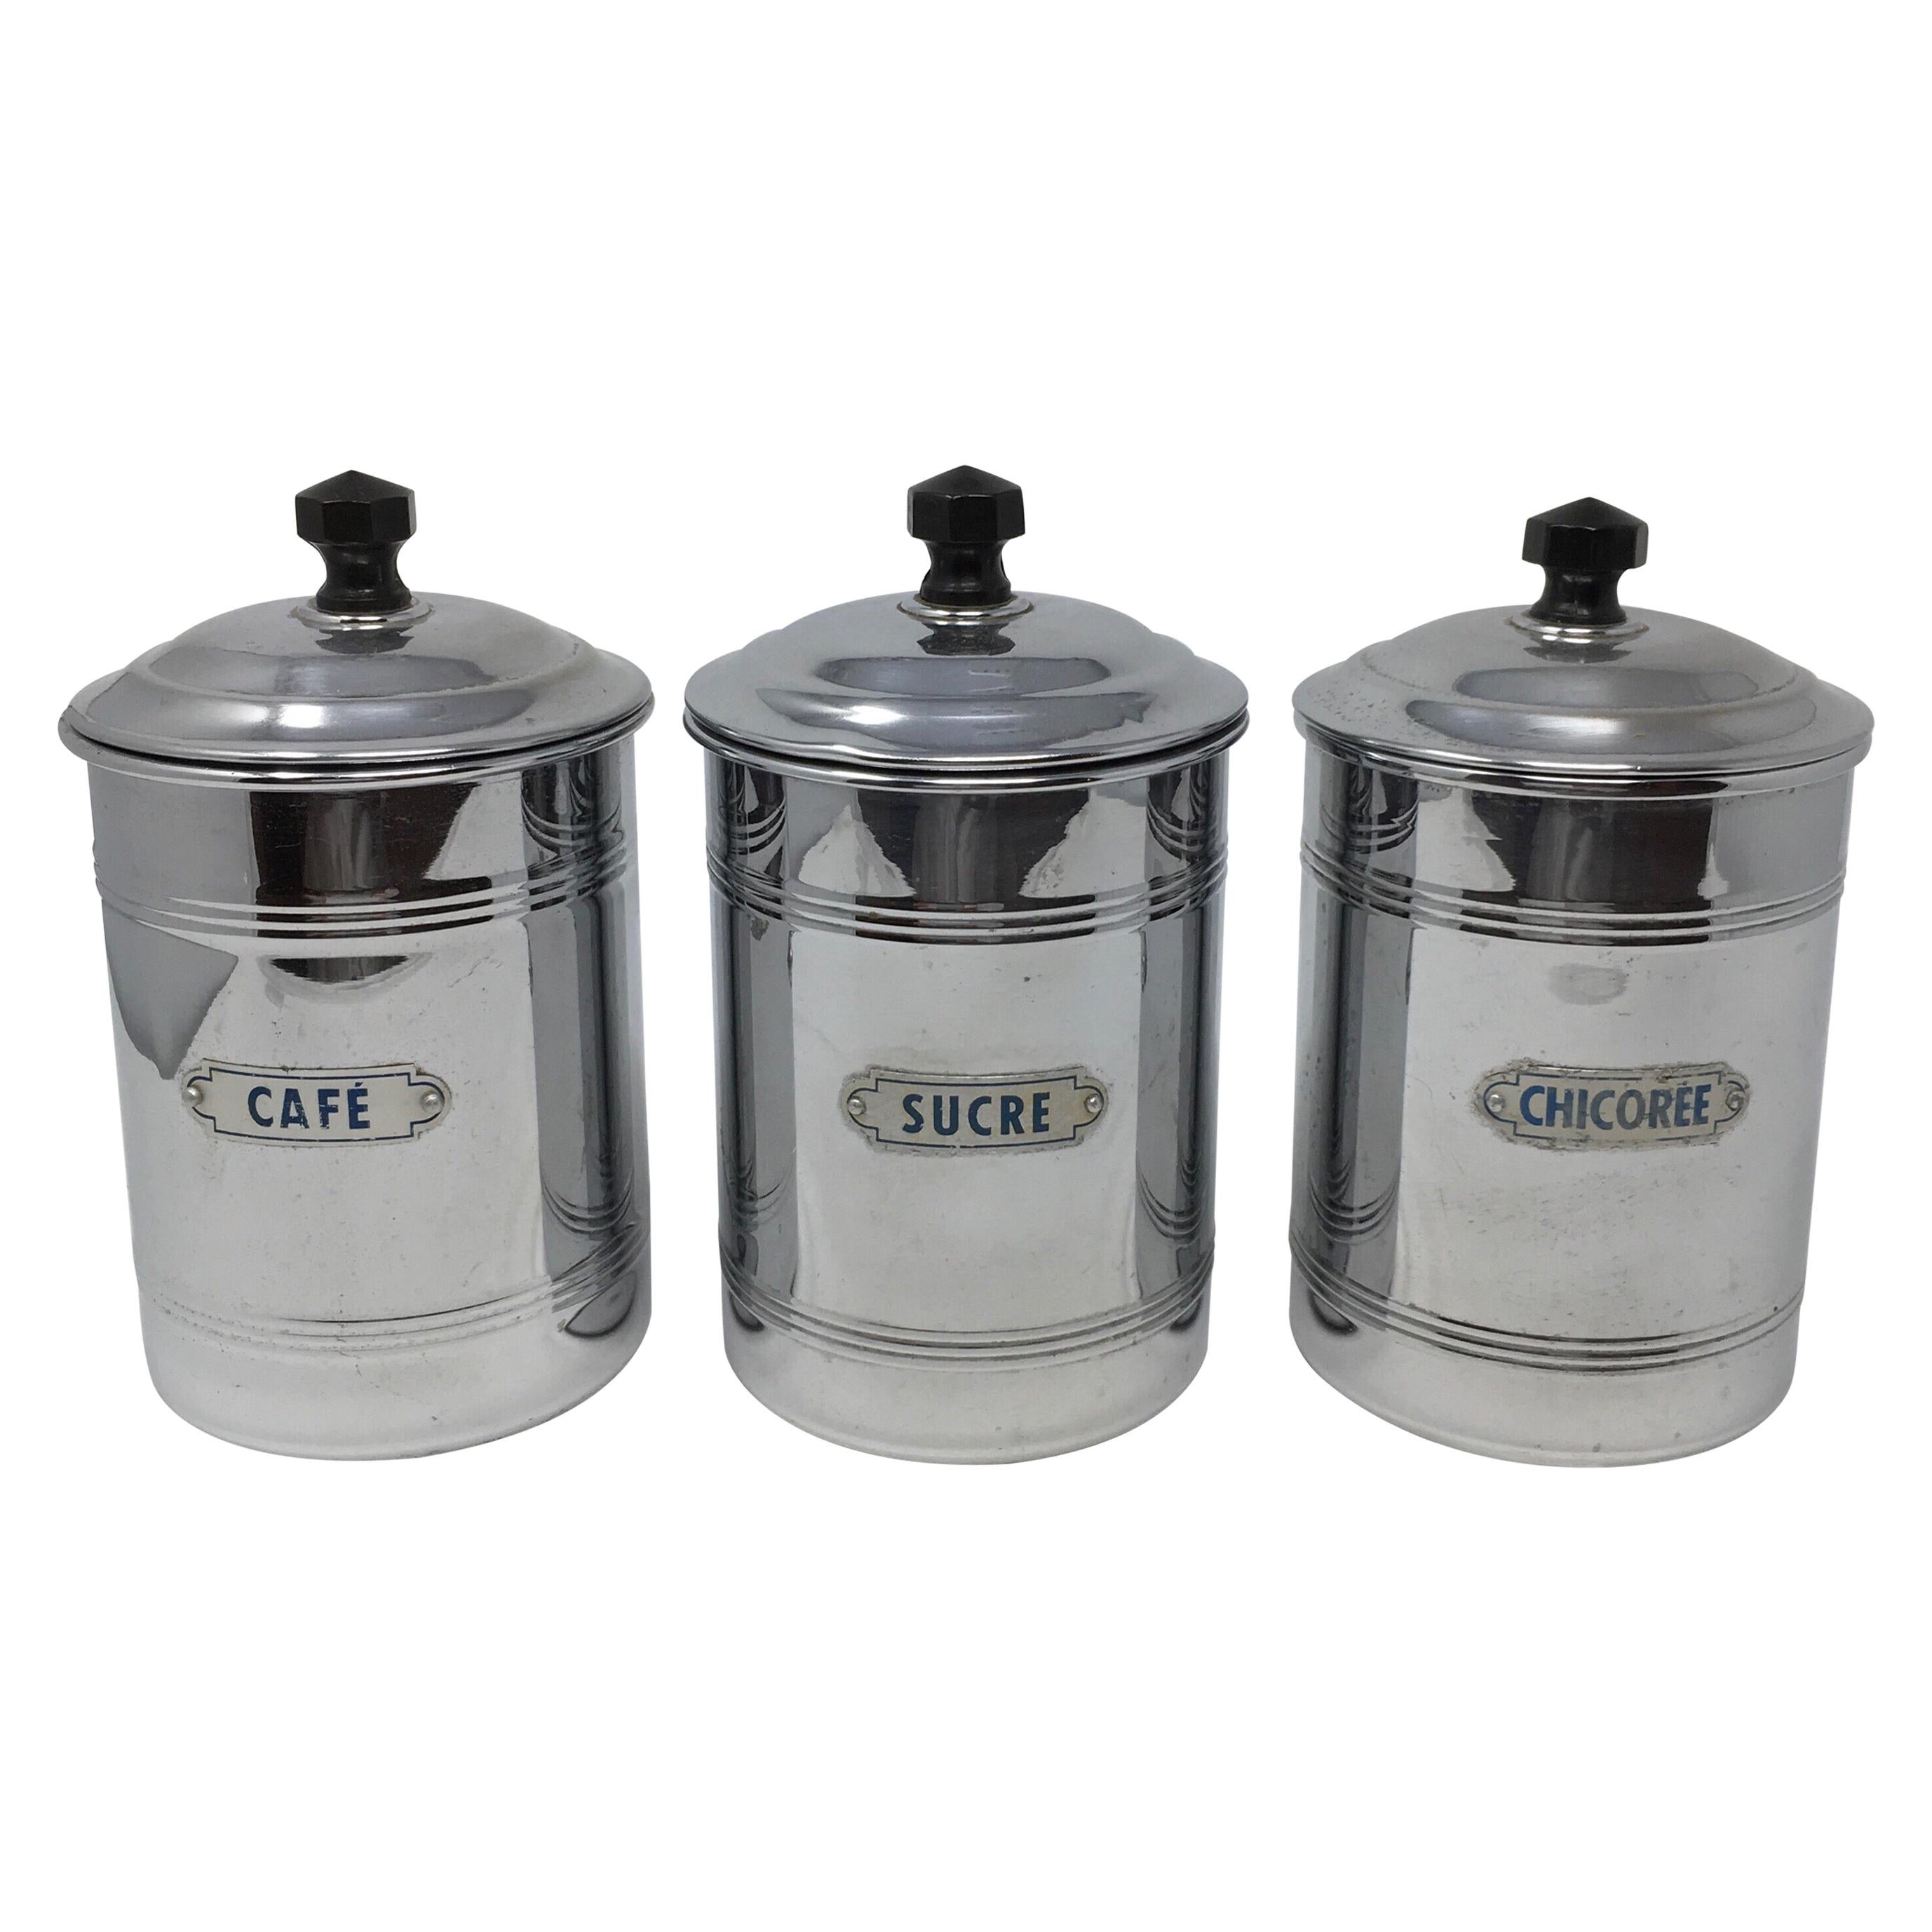 Antique Three-Piece French Aluminum Coffee Set of Canisters, circa 1920s